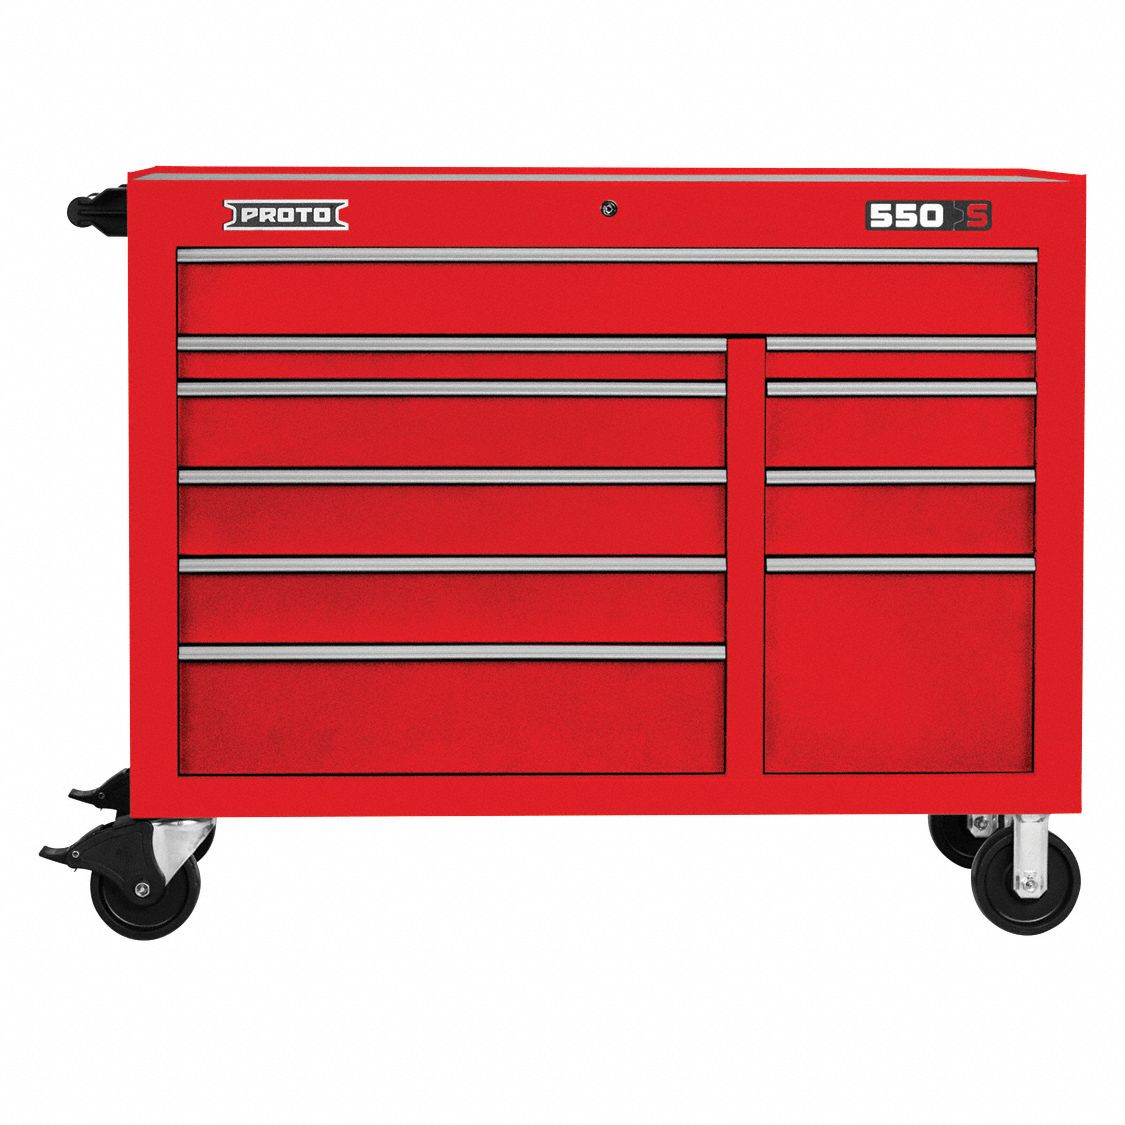 Craftsman Tool Boxes for sale